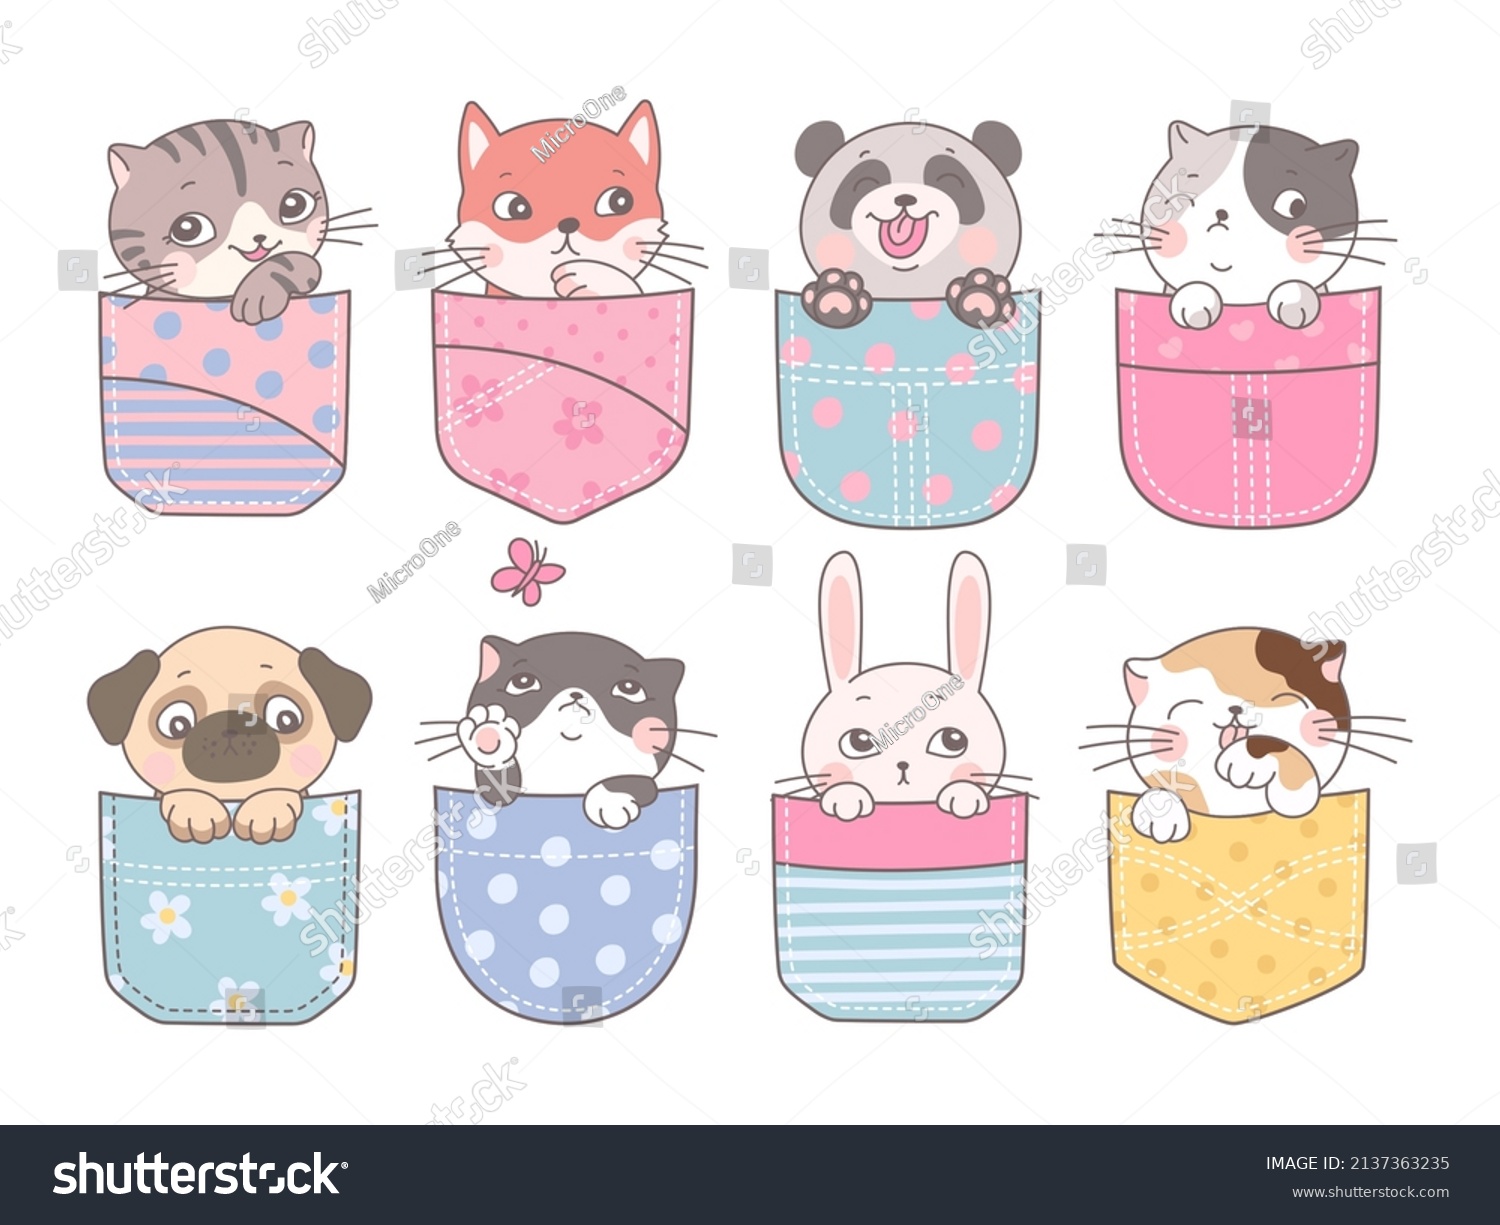 SVG of Cute pocket animal. Cartoon pockets kitten, dog and bunny. Happy friends for kids, adorable pets print. Funny nowaday panda, fox and cats vector kit svg